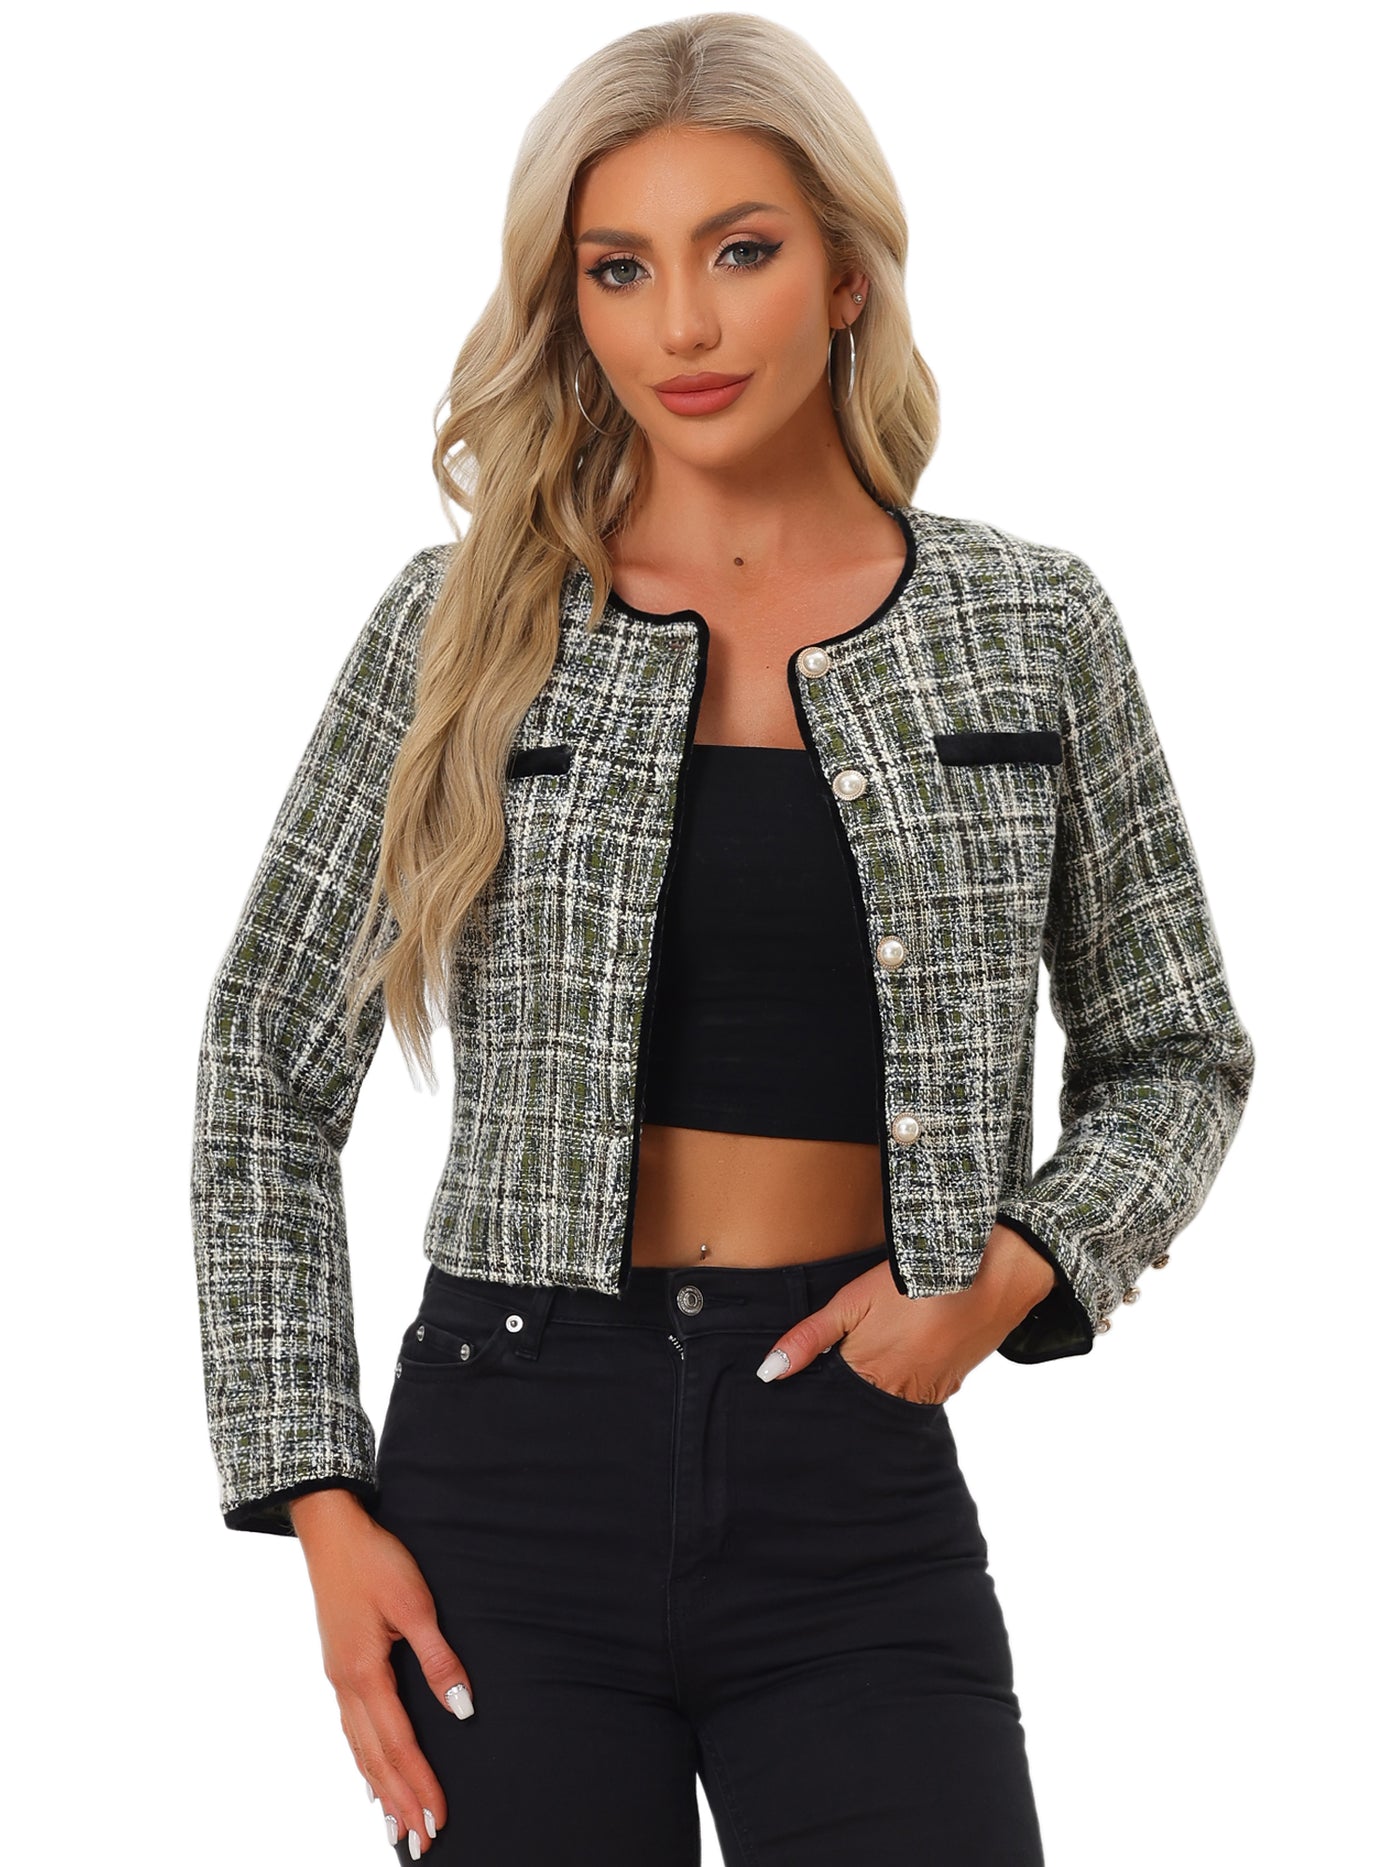 Allegra K Tweed Plaid Round Neck Faux Pearl Button Long Sleeve Cropped Jacket